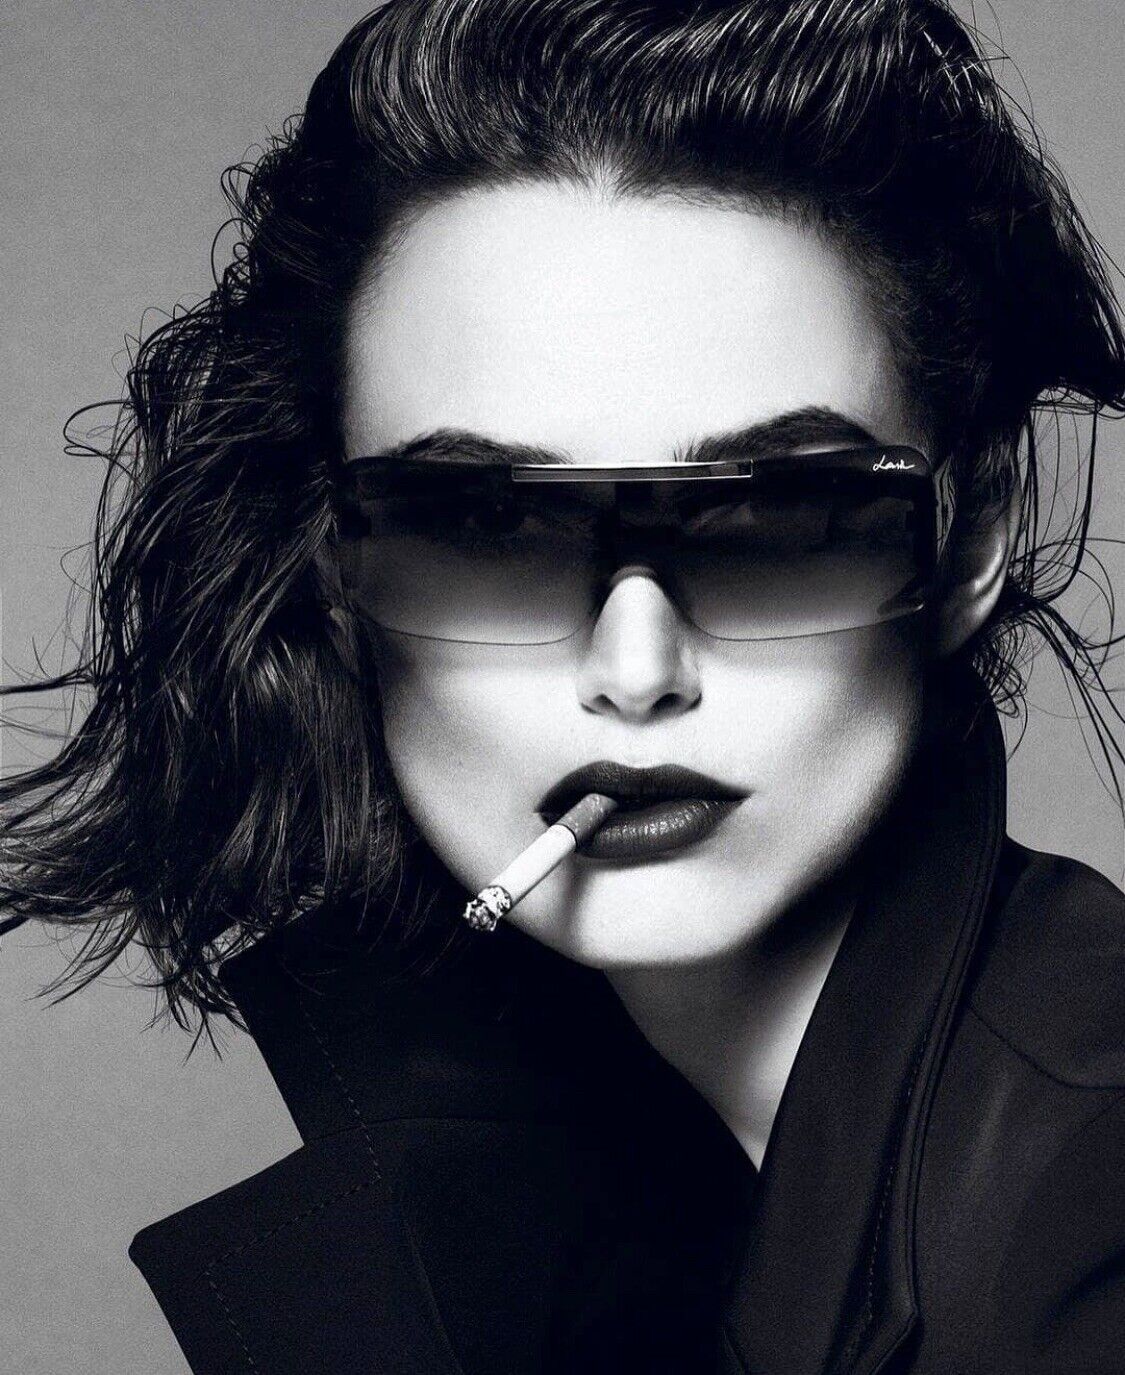 KIERA KNIGHTLY - EXTREMELY COOL HEADSHOT - WITH SUNGLASSES AND SMOKING 